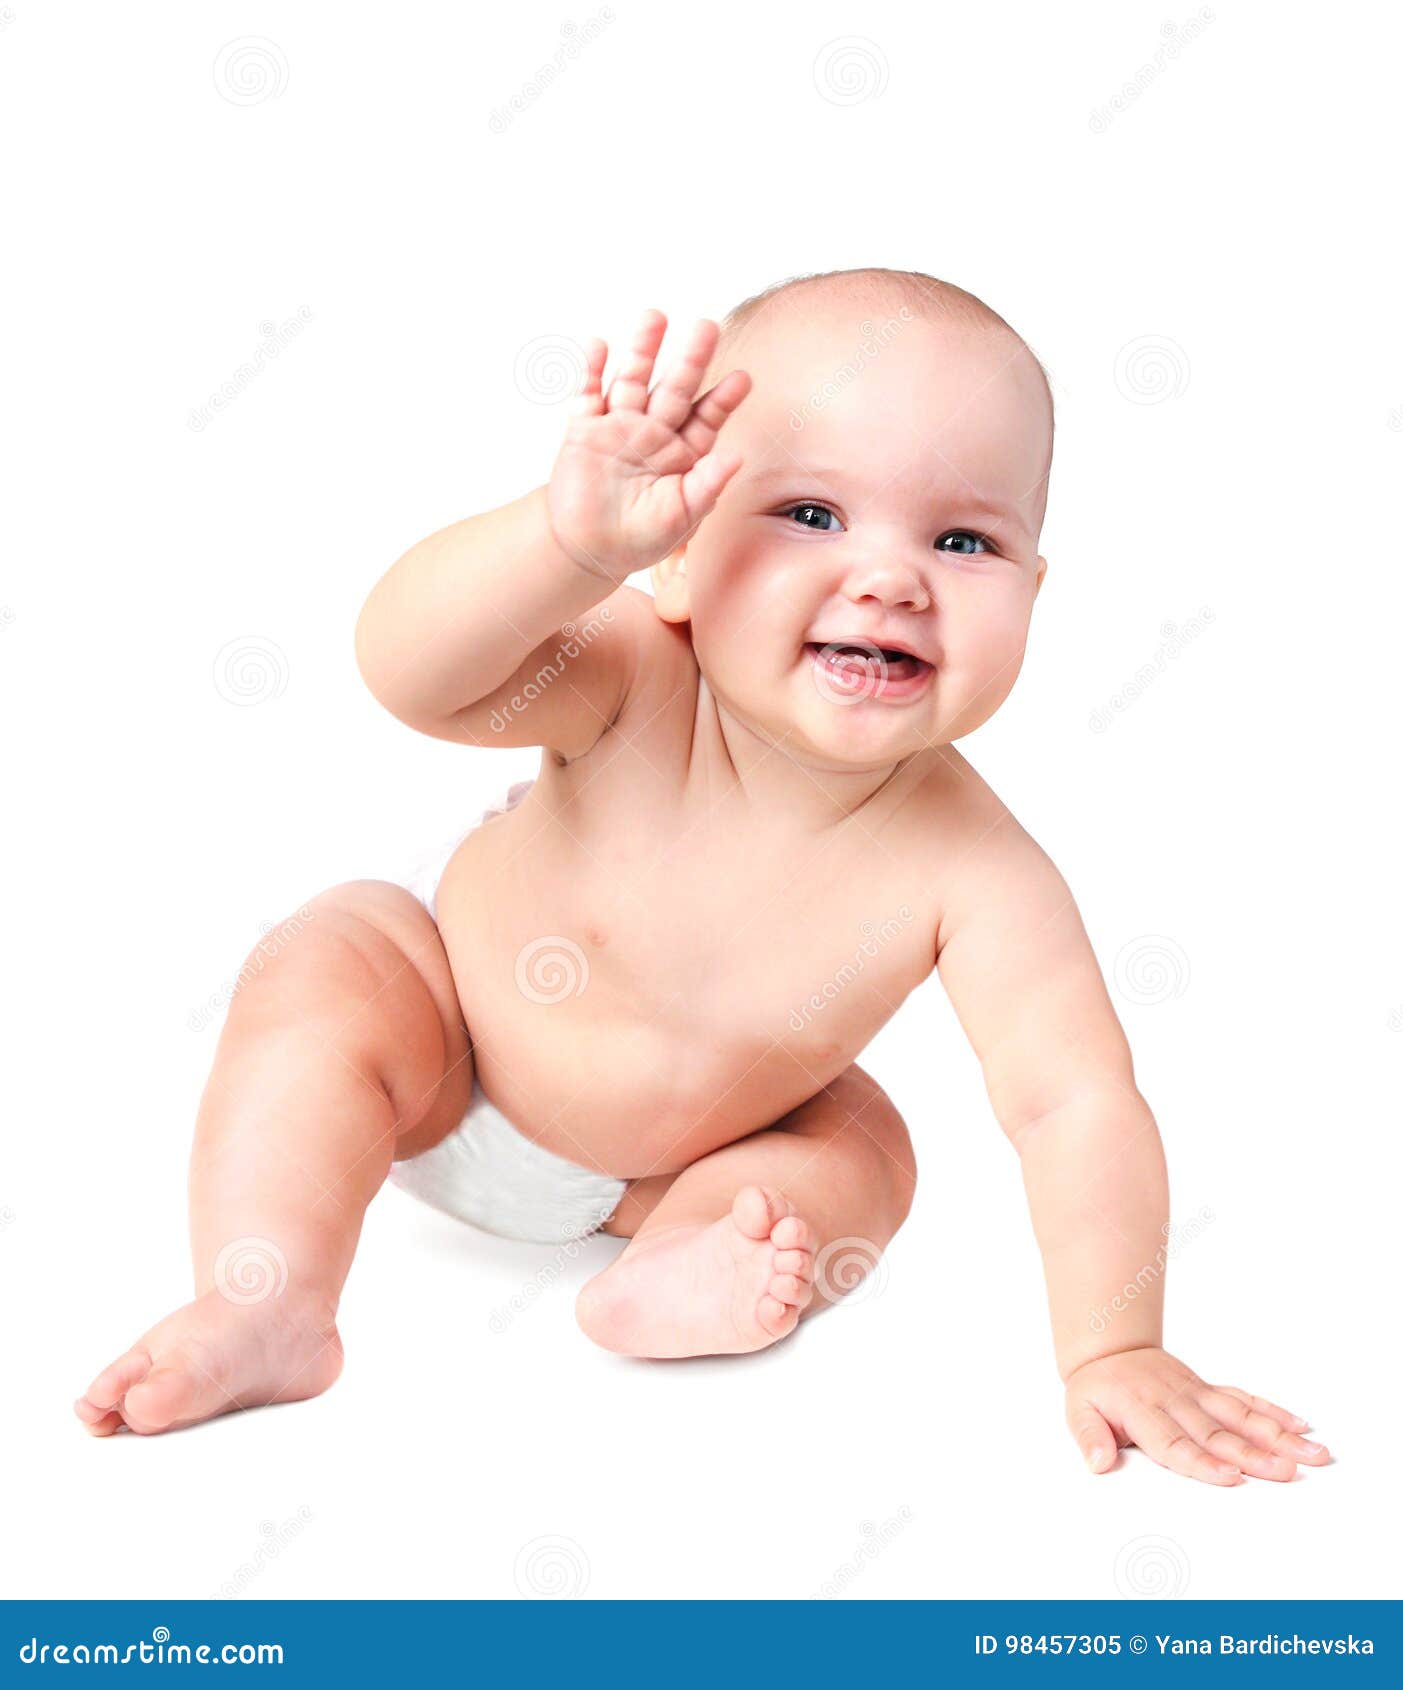 Baby Smile Isolated on White. Stock Image - Image of laughing ...